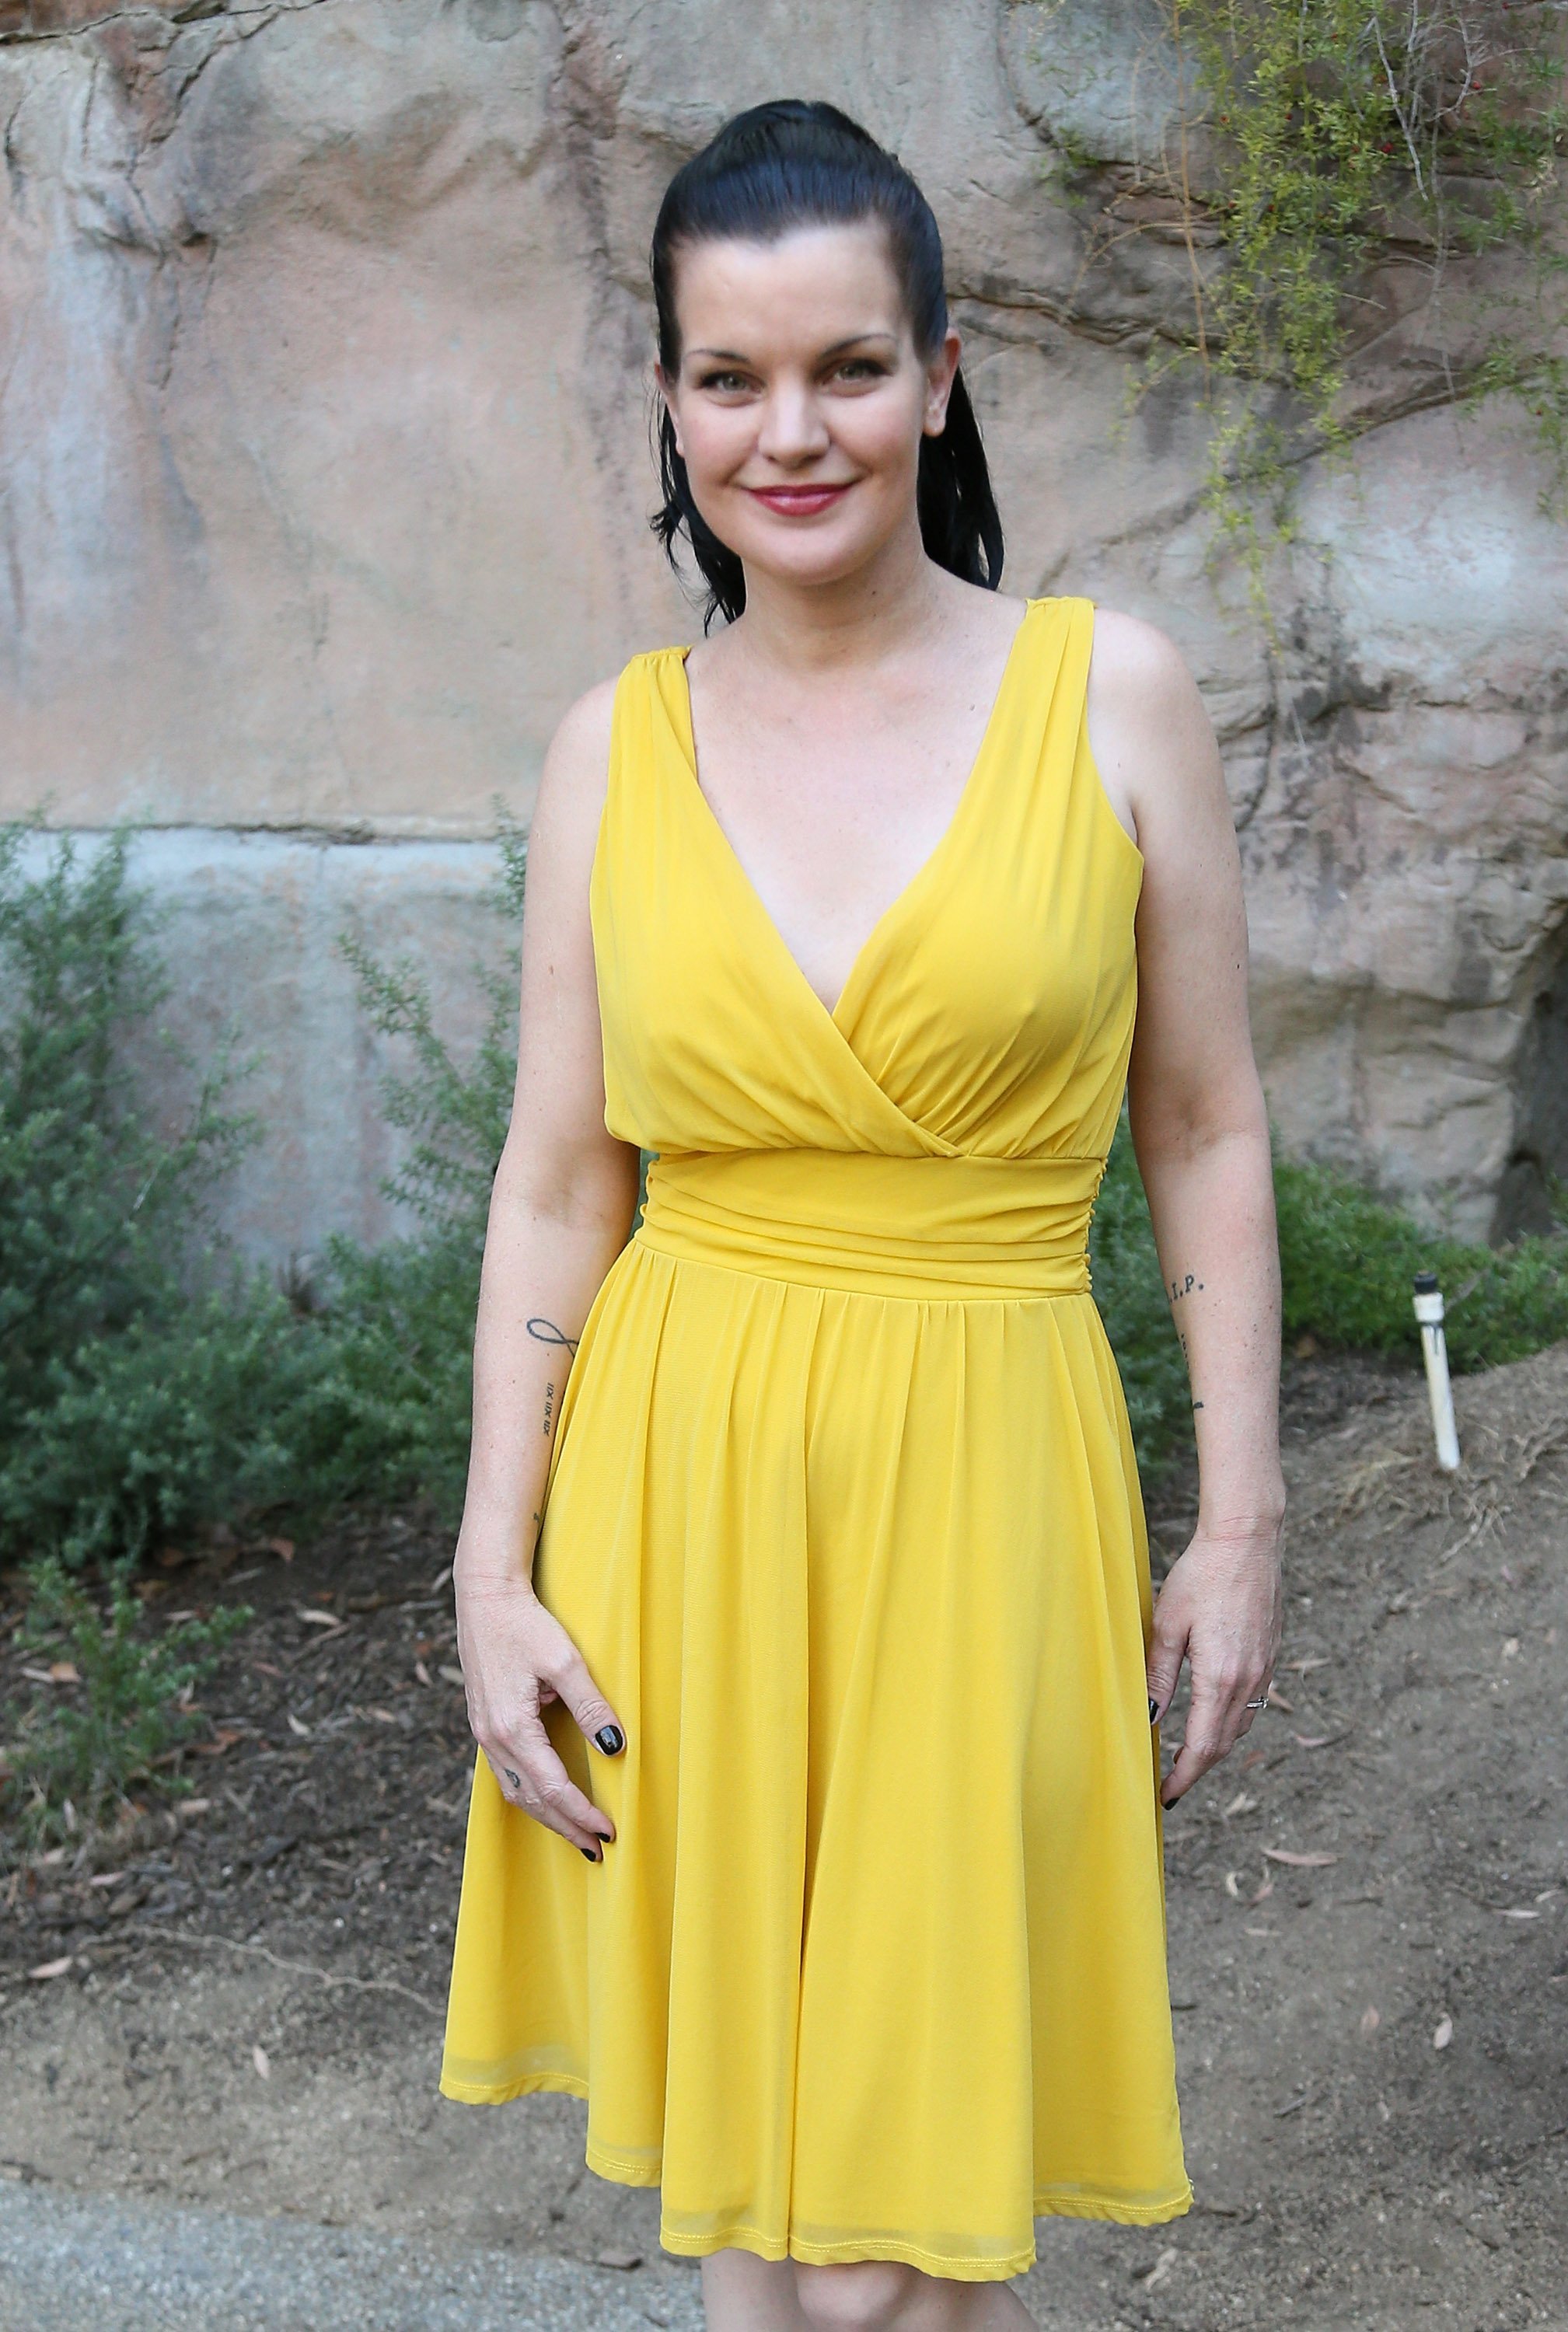 Pauley Perrette attends the Greater Los Angeles Zoo Association's (GLAZA) 45th Annual Beastly Ball at the Los Angeles Zoo on June 20, 2015 | Photo: GettyImages